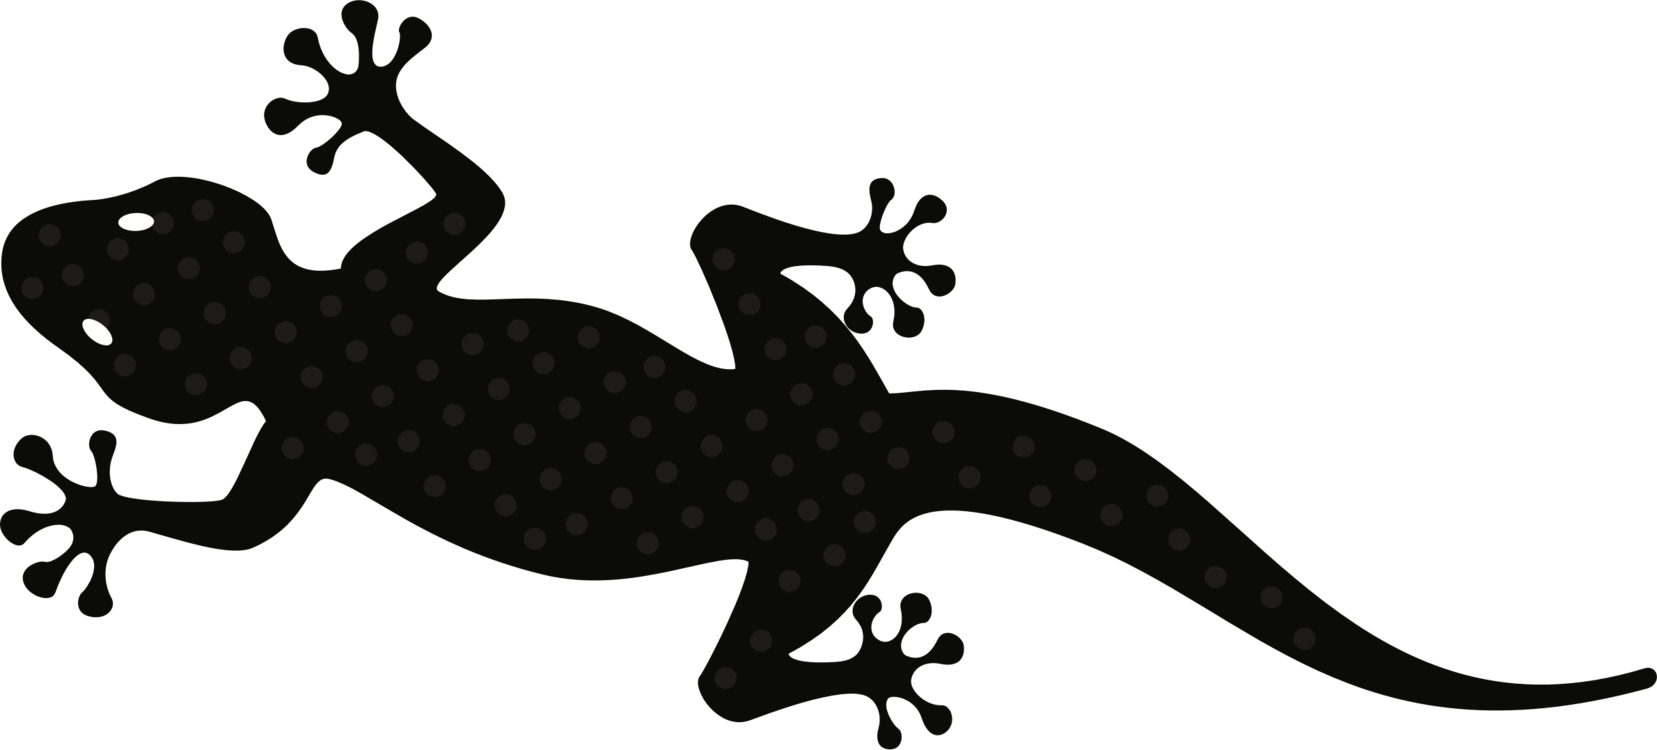 Reptile,Silhouette,Fictional Character